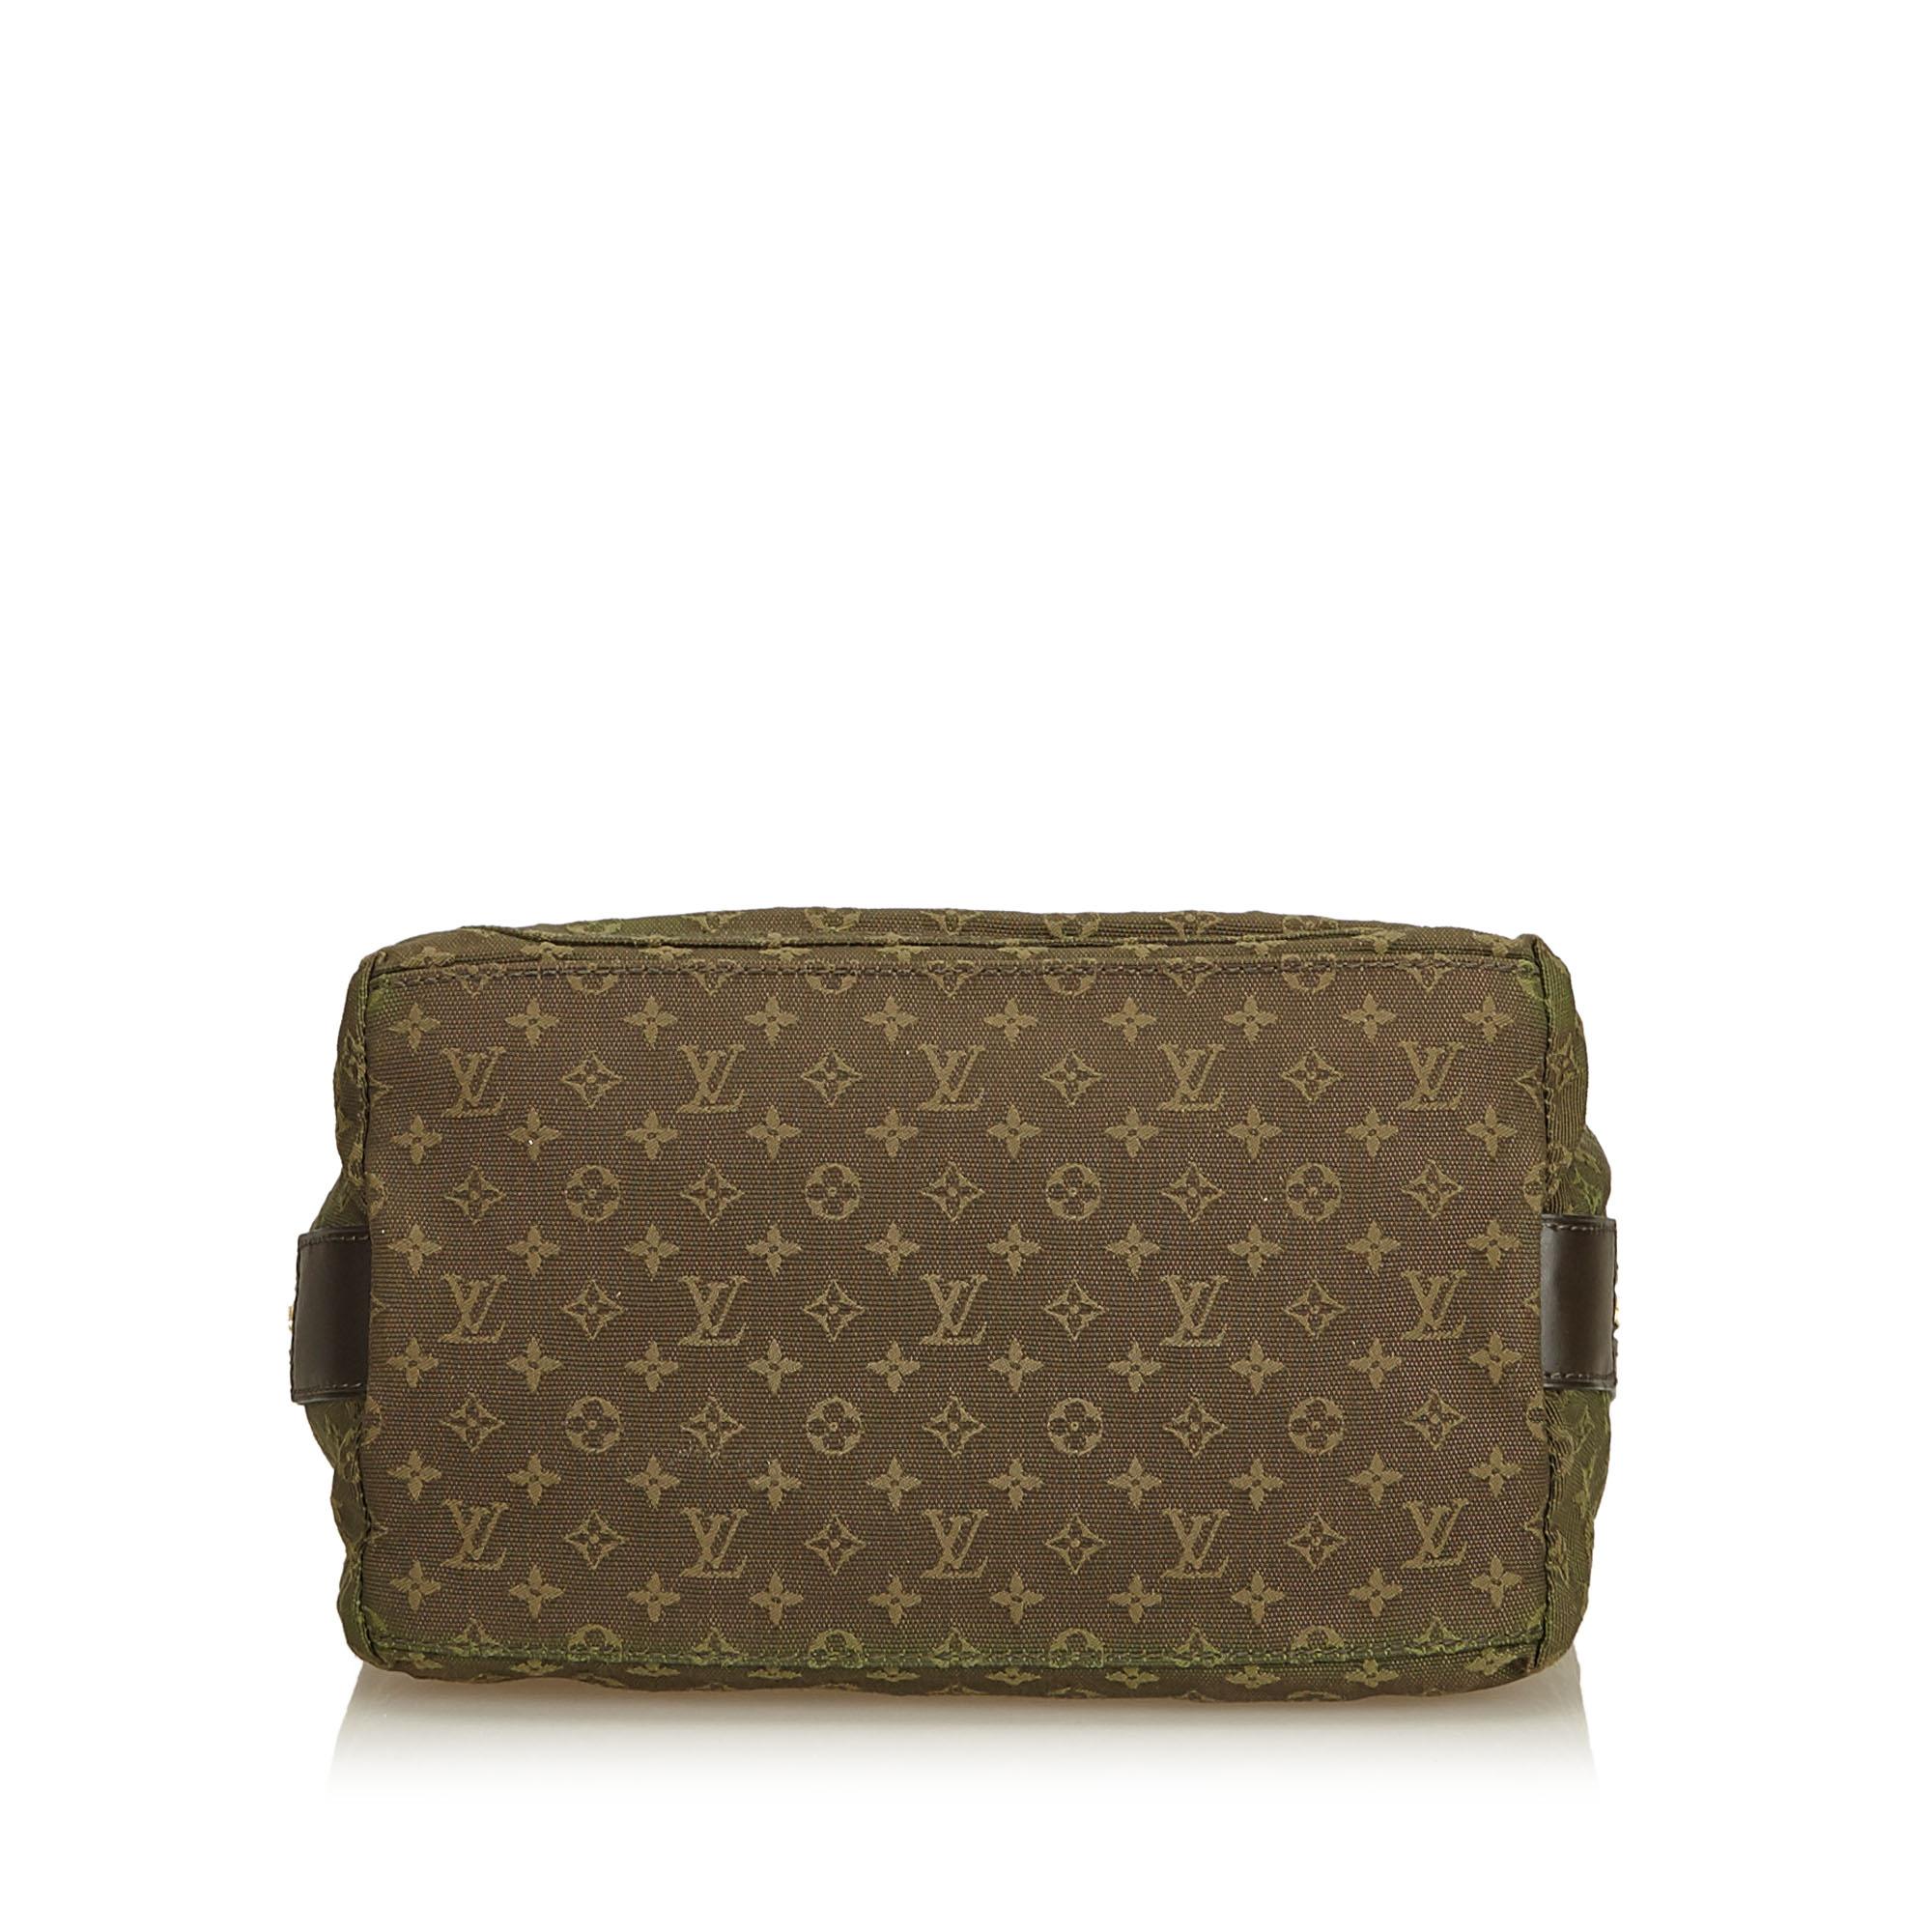 Louis Vuitton Monogram Cotton Mini Lin Sac Mary Kate Everyday Bag in Brown - Lyst